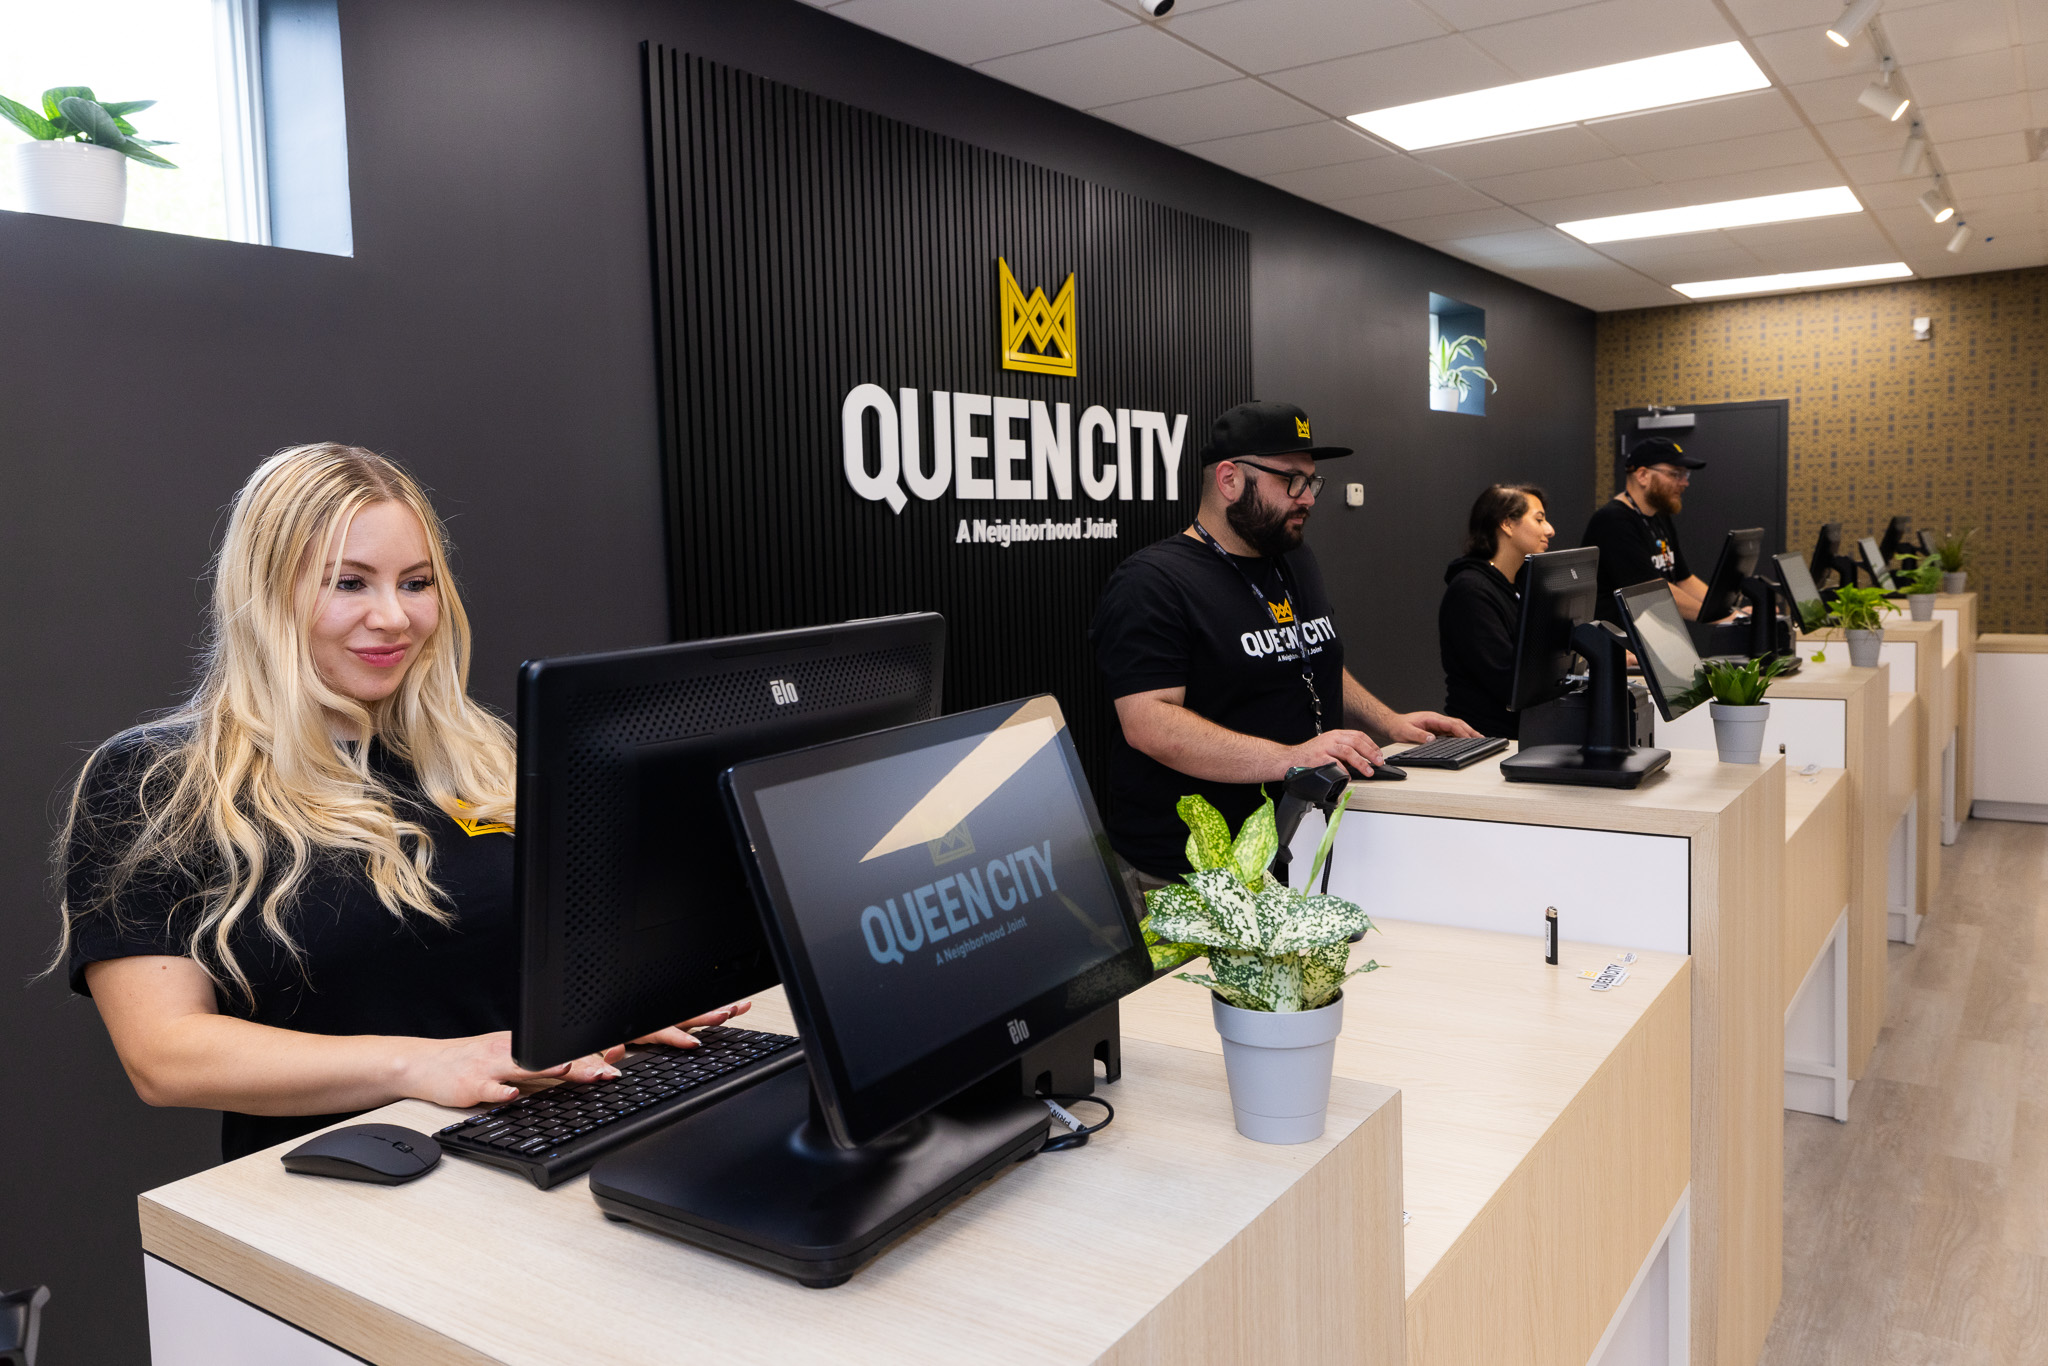 Four budtenders are standing at the checkout counter at Queen City in Plainfield, New Jersey, each behind a checkout station. Two of the budtenders are sporting beards and hats. All four budtenders are wearing black and branded Queen City t-shirts. The store's logo is behind them.